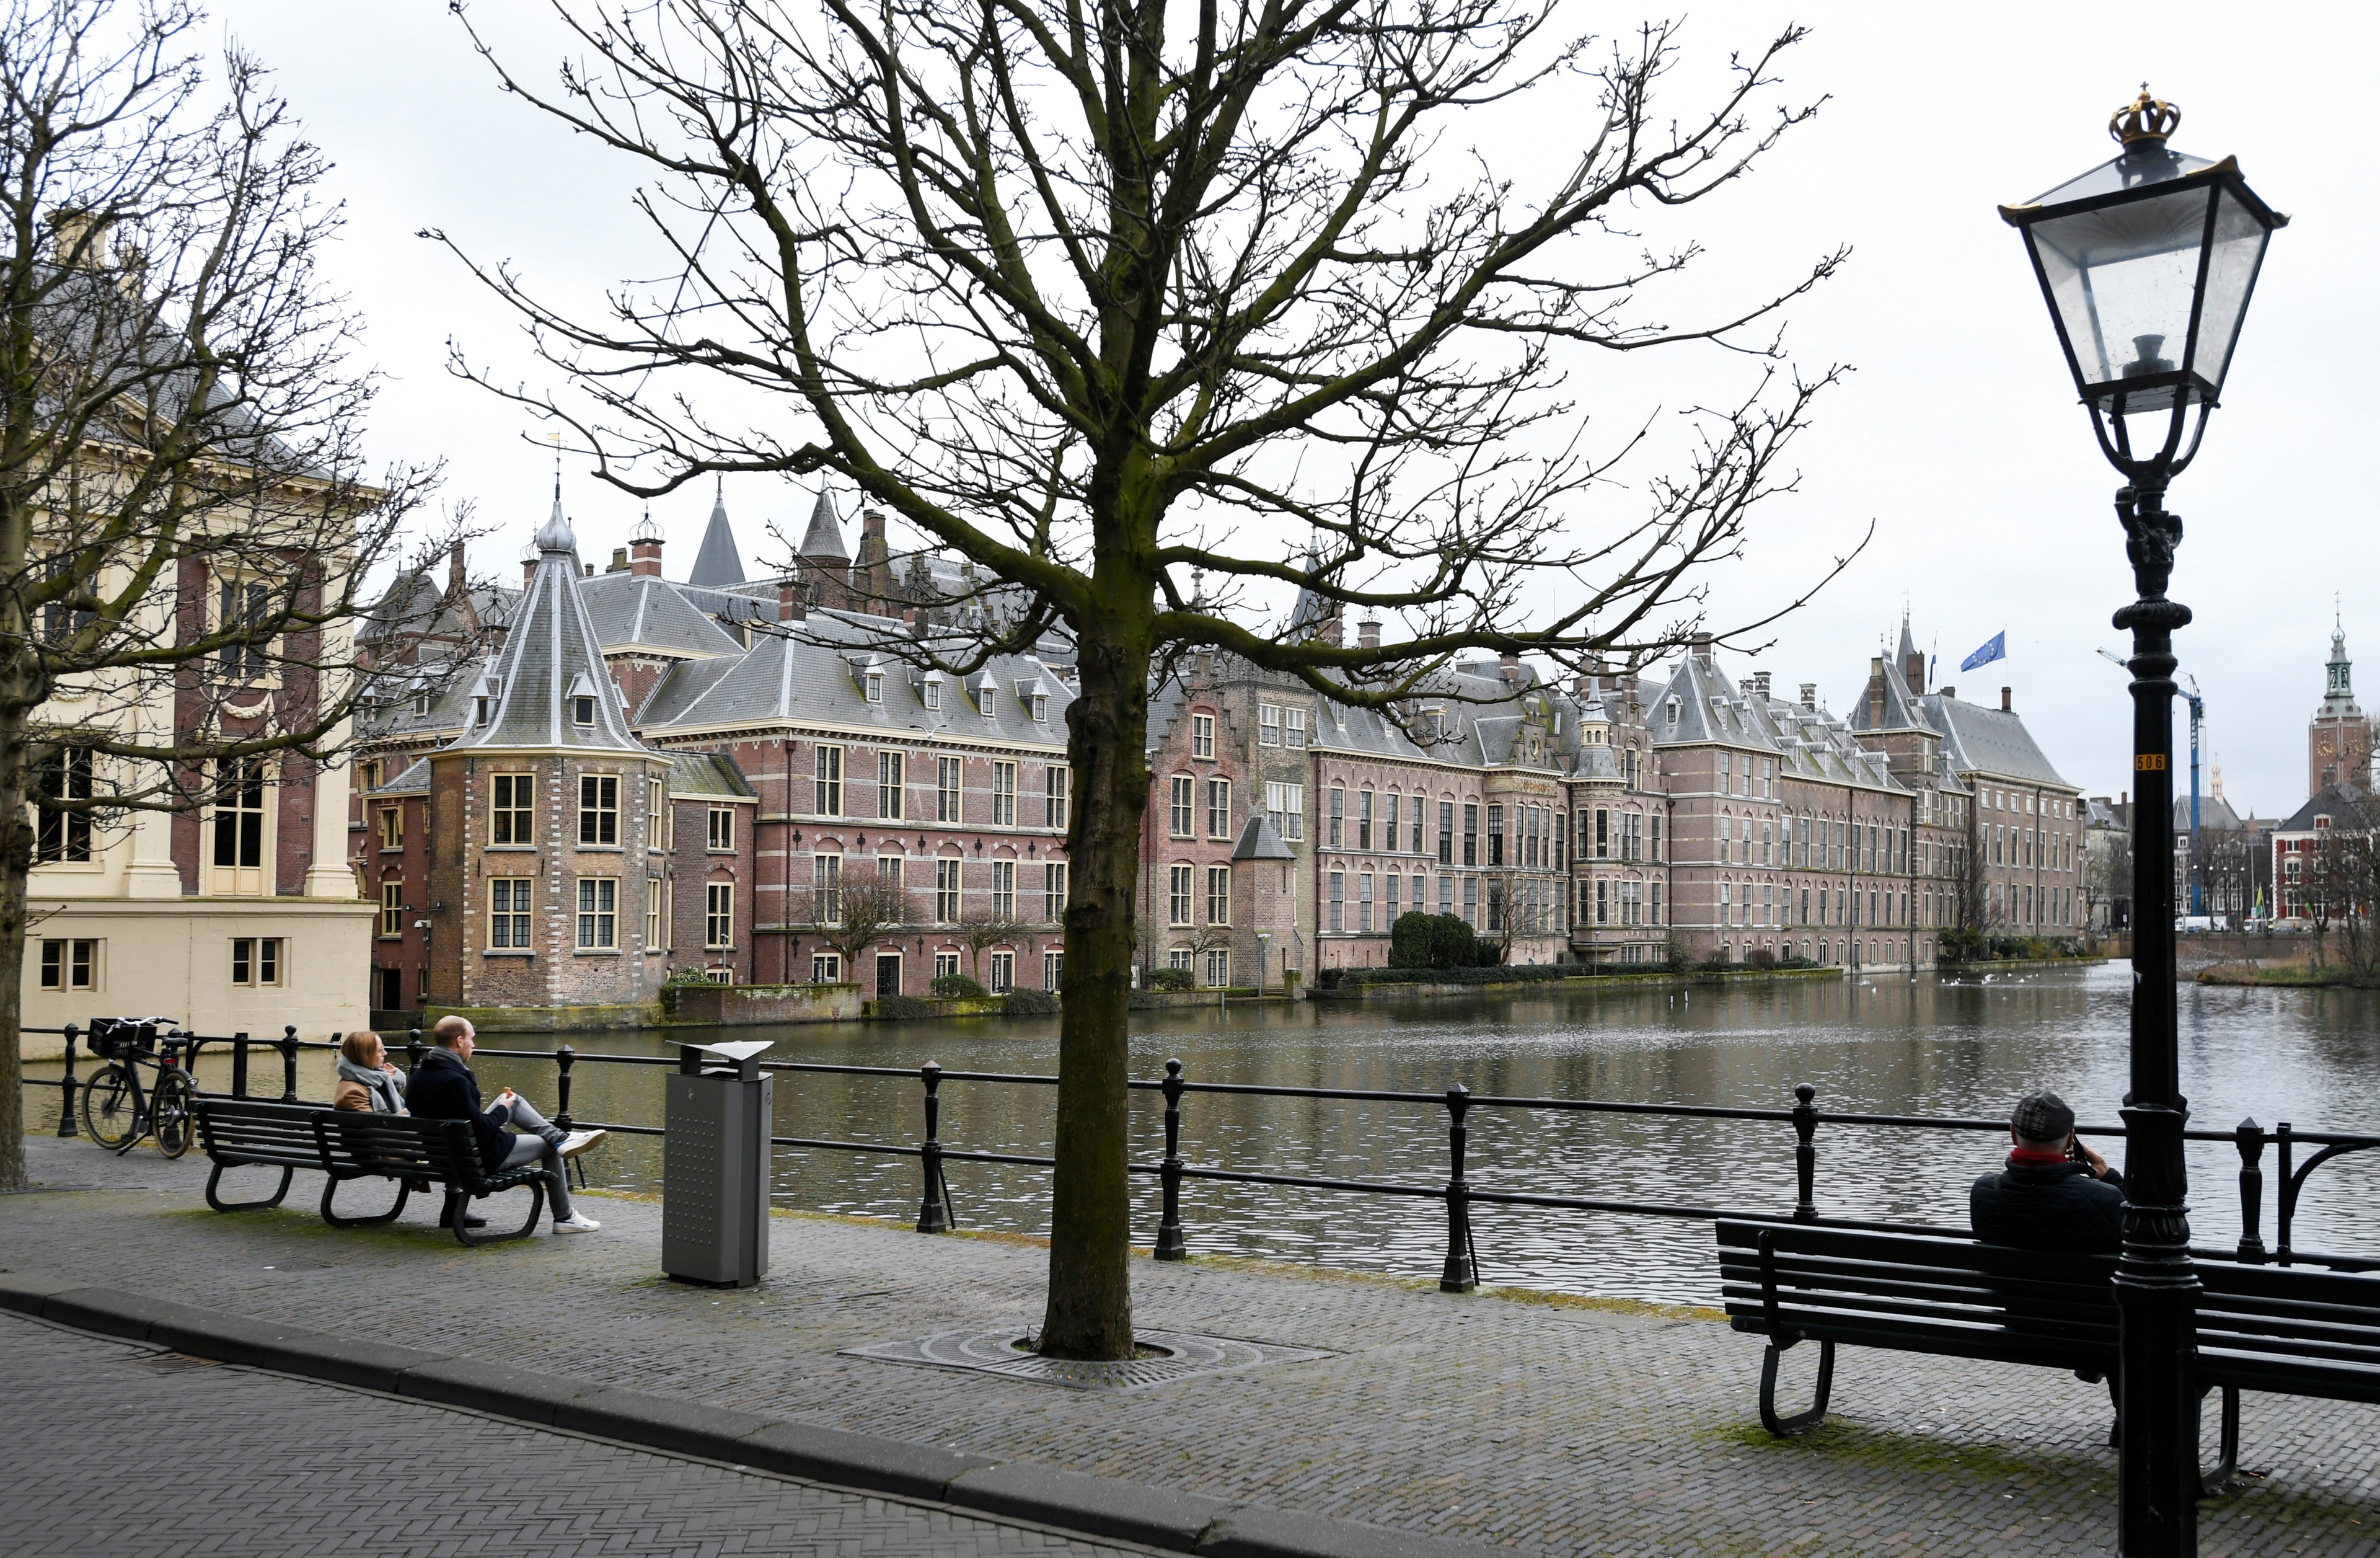 FILE PHOTO: People sit on benches with a view of the parliament building in The Hague, Netherlands March 9, 2021. Picture taken March 9, 2021. REUTERS/Piroschka van de Wouw/File Photo